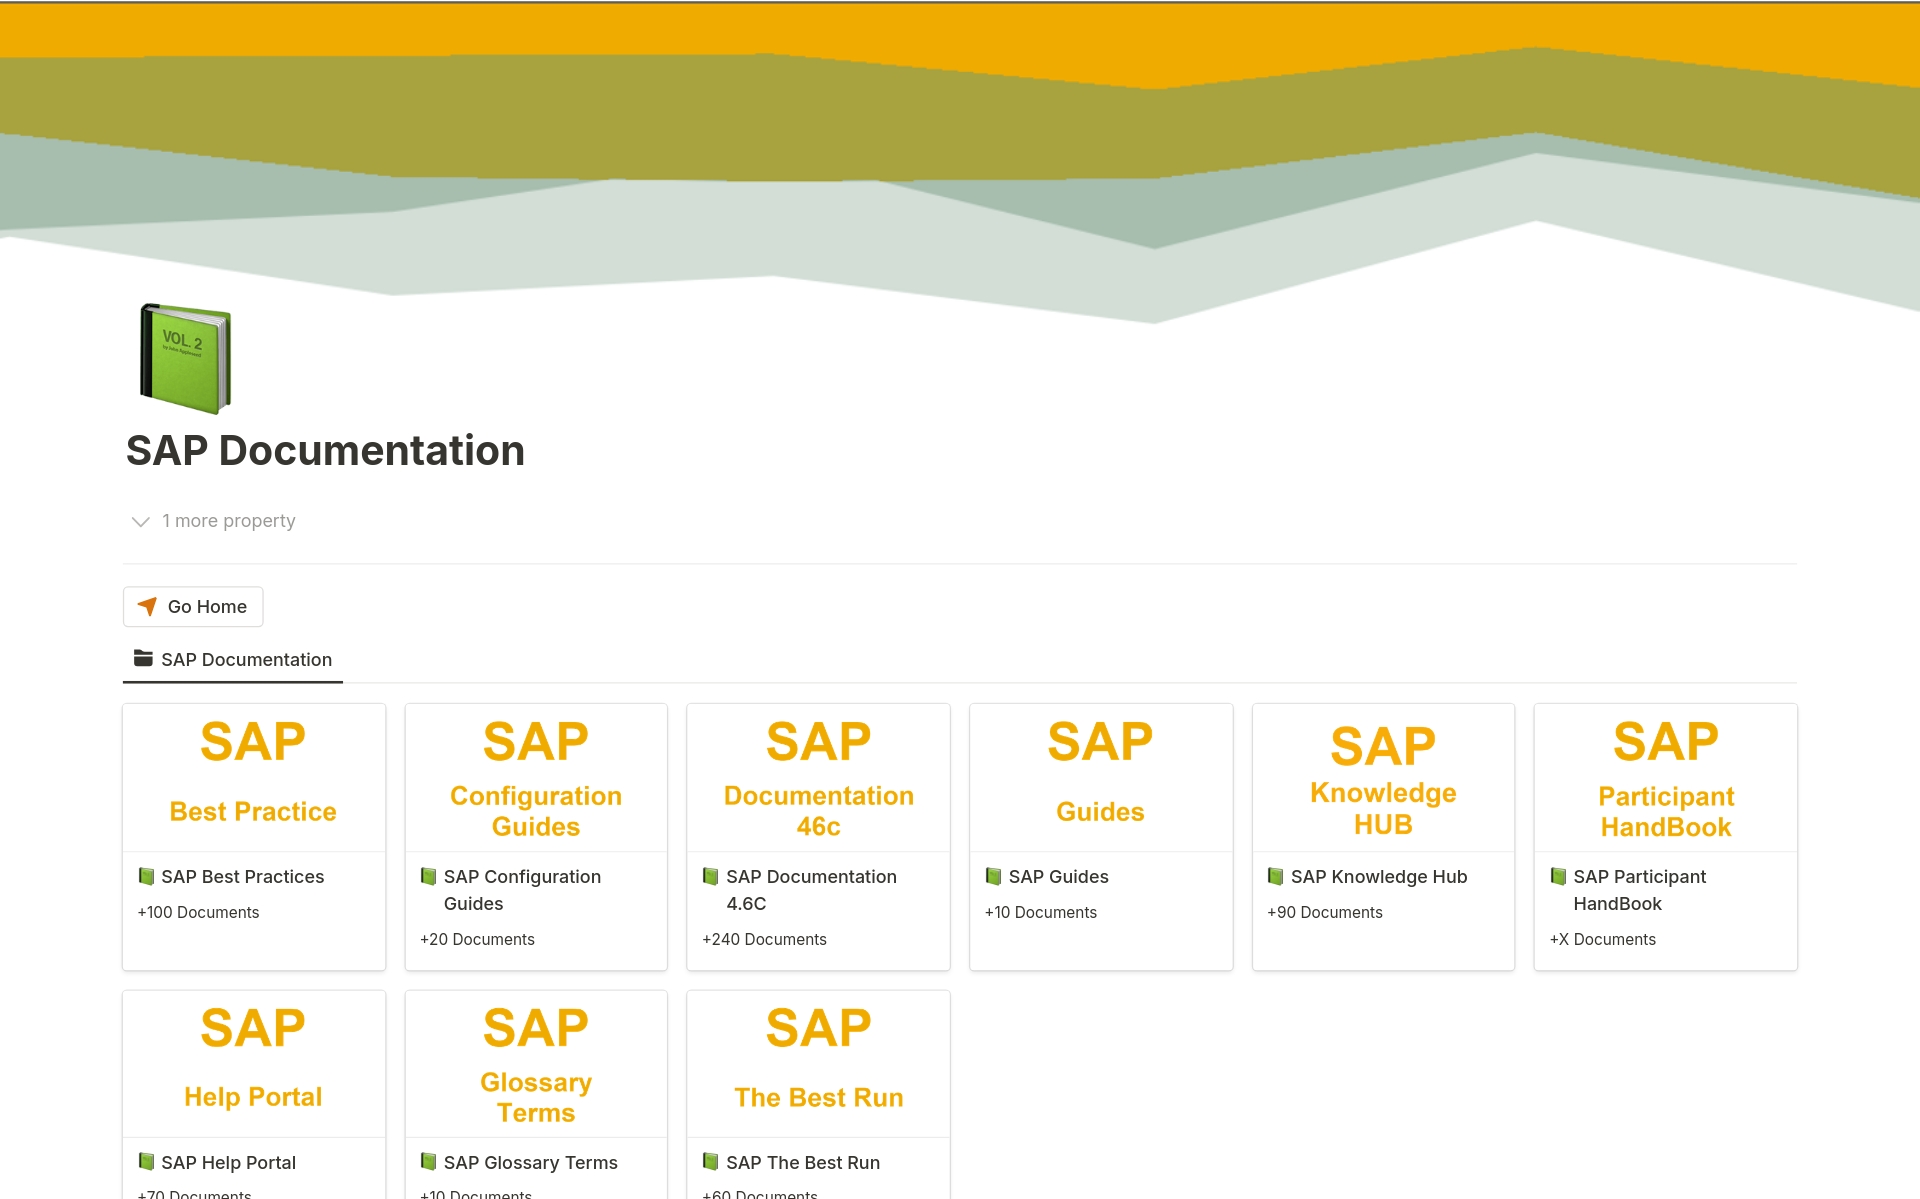 SAP Project · Capture and Organize all your SAP Documentation in one-place. 
Clients database, Project Documentation, SAP Documentation and Resources - SAP Press* Document - 
This template is updated weekly with more documents and resources.